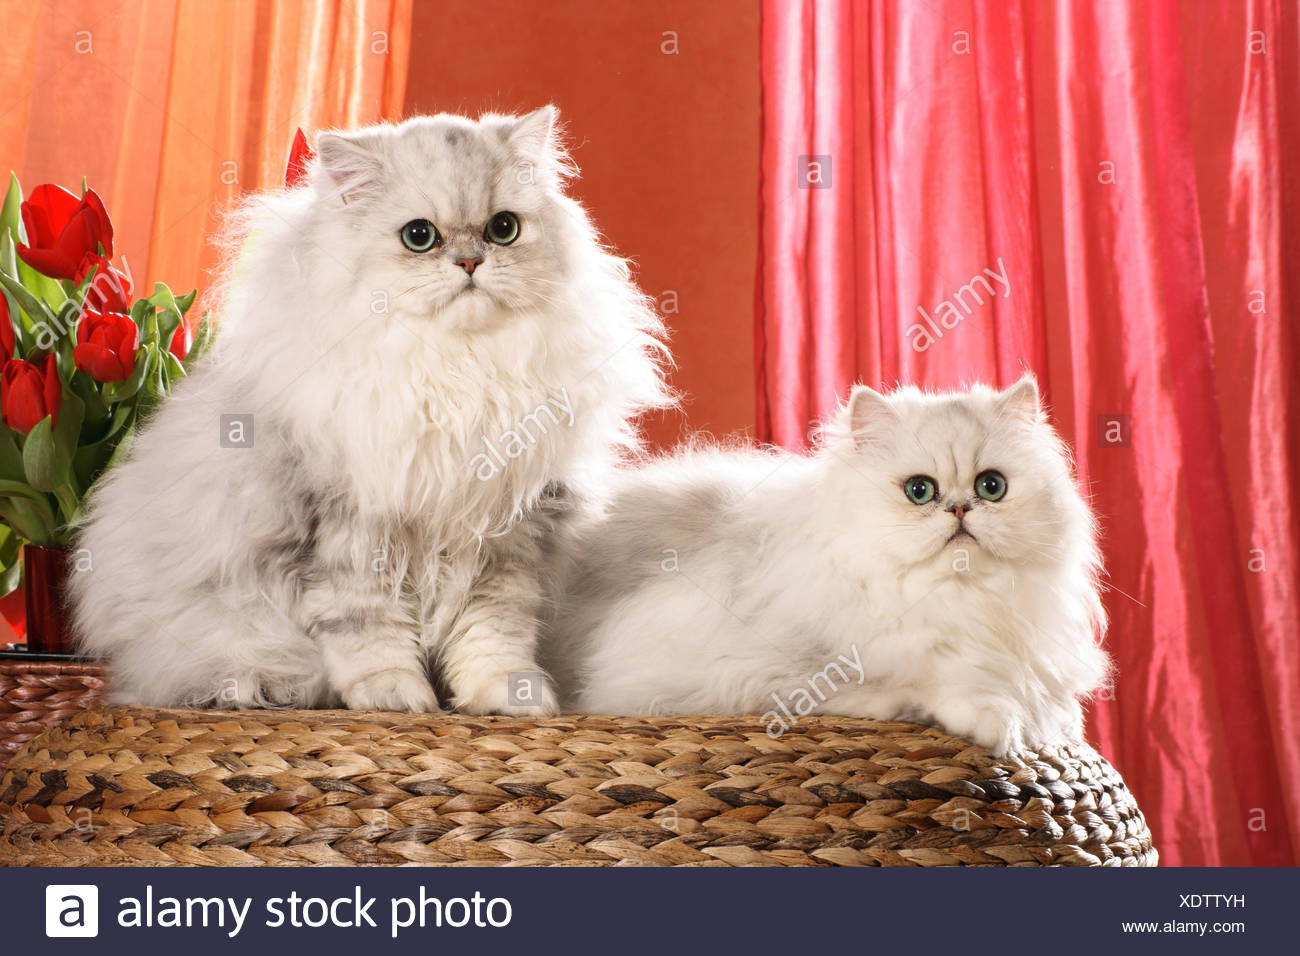 Persian Cat Two White Adults Sitting Next To Red Tulips Stock Photo Alamy